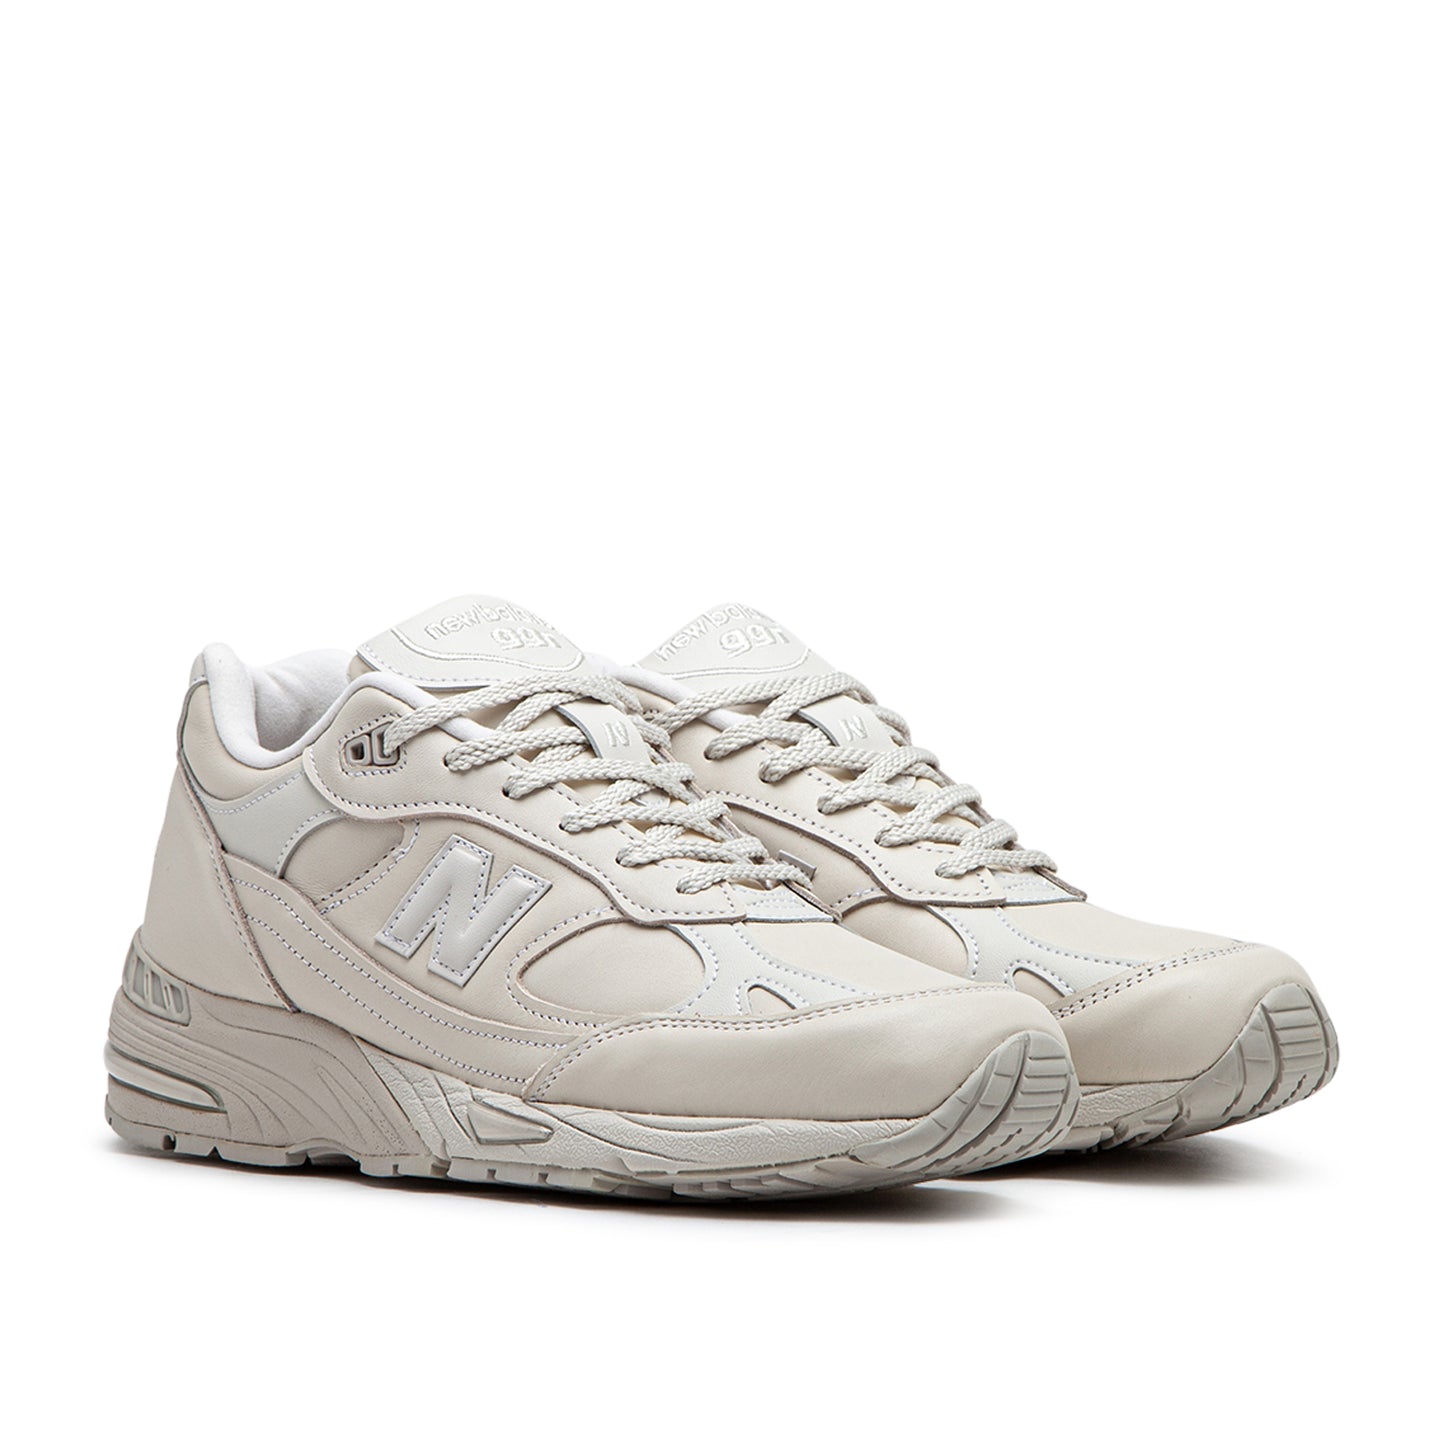 New Balance M991OW Made in UK Contemporary Luxe (Creme)  - Allike Store